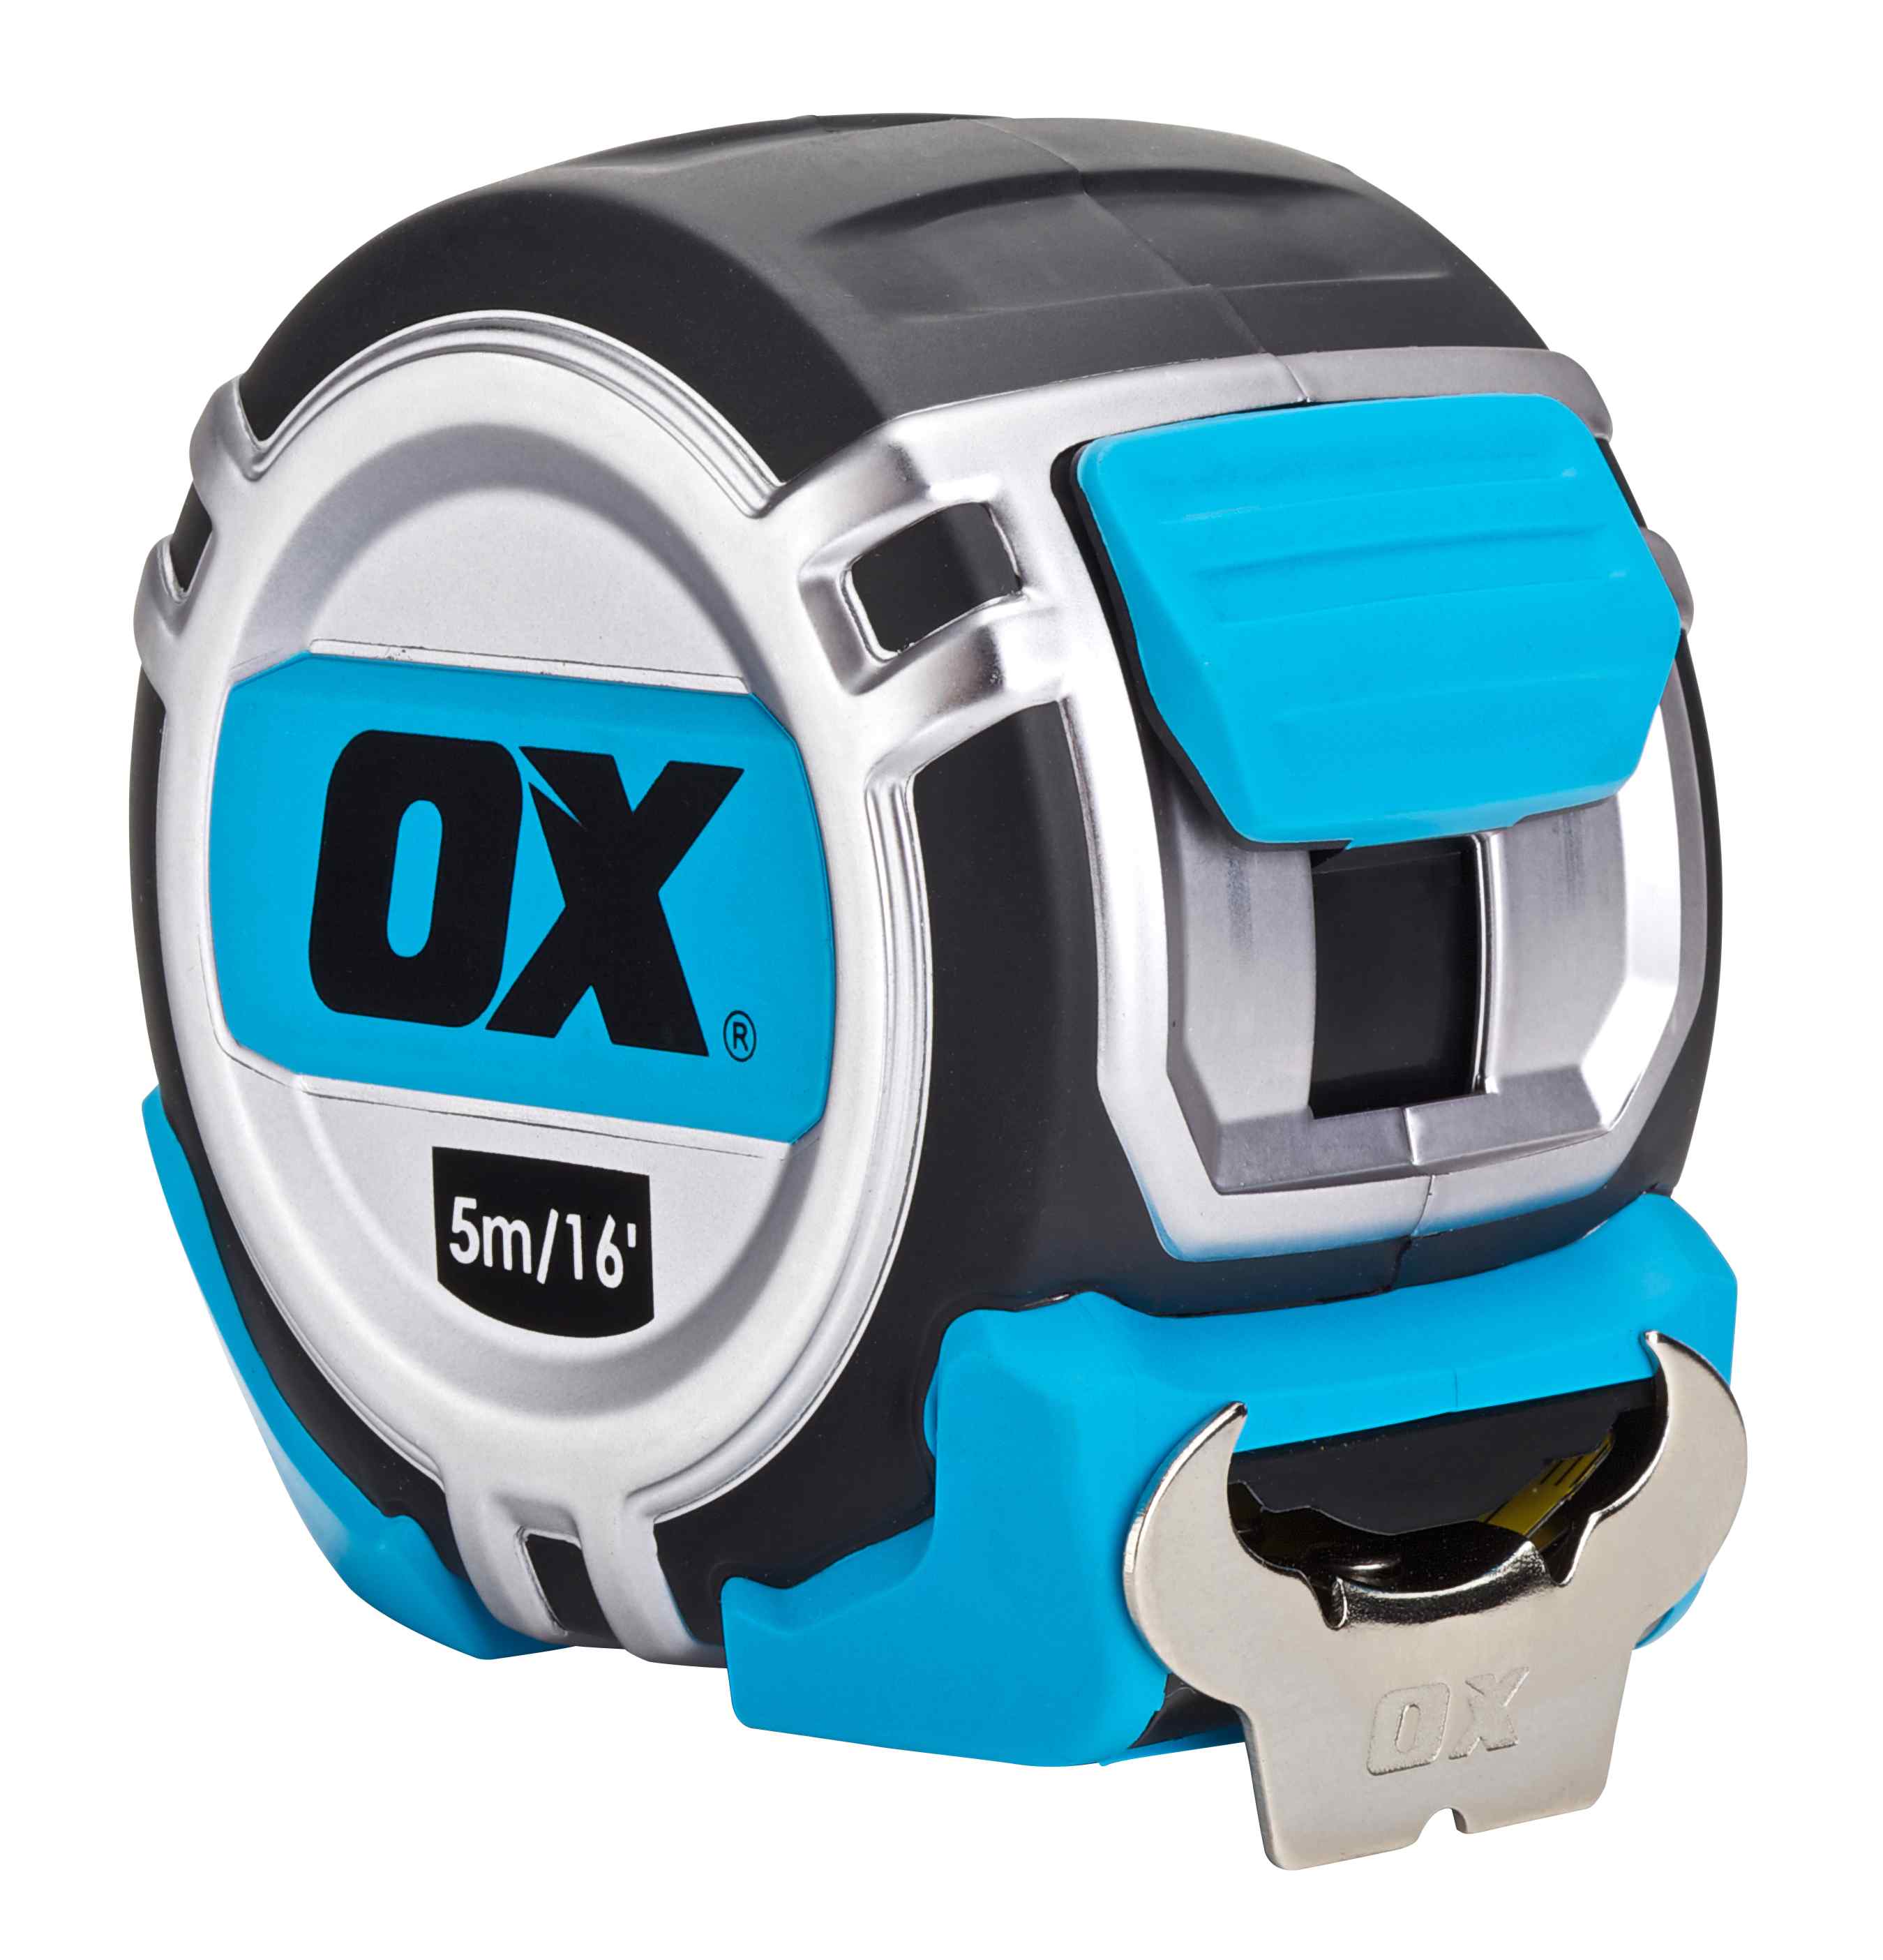 OX Pro Metric only 5m Tape Measure